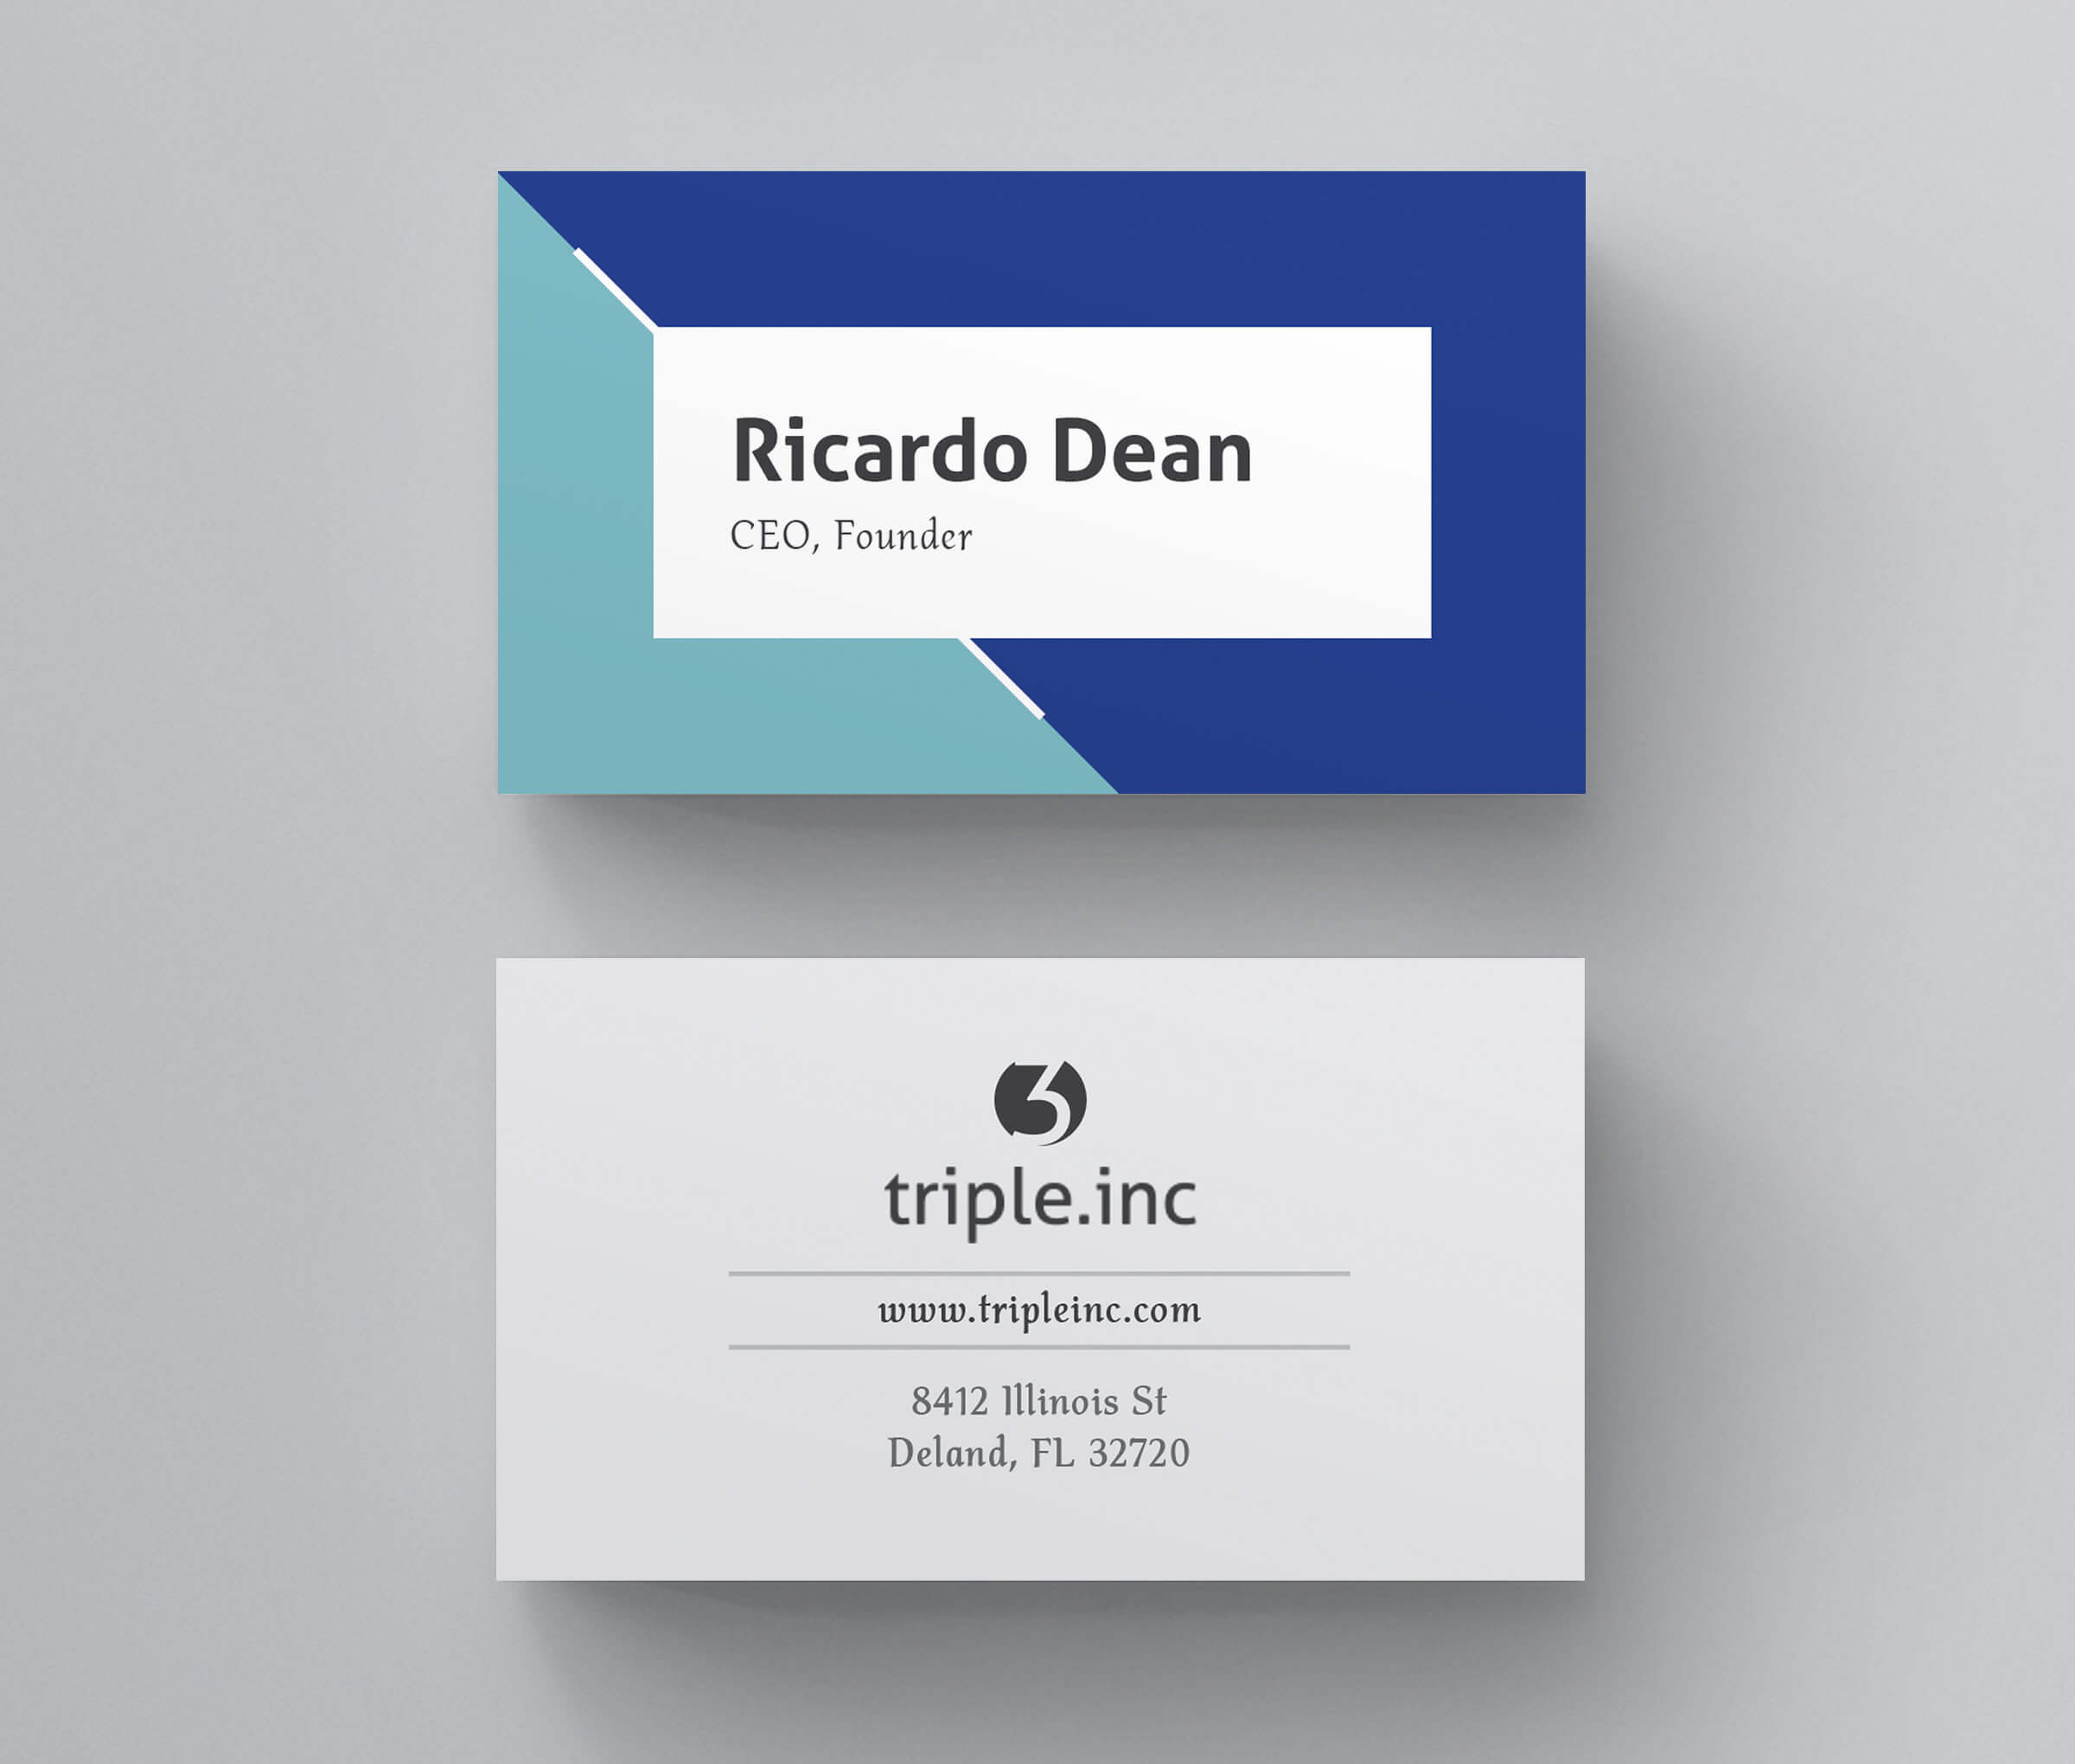 Business Card Template, Business Card Indesign, Ms Word Business Card,  Calling Card, Editable, Instant Download, Affordable Business Card Inside Template For Calling Card